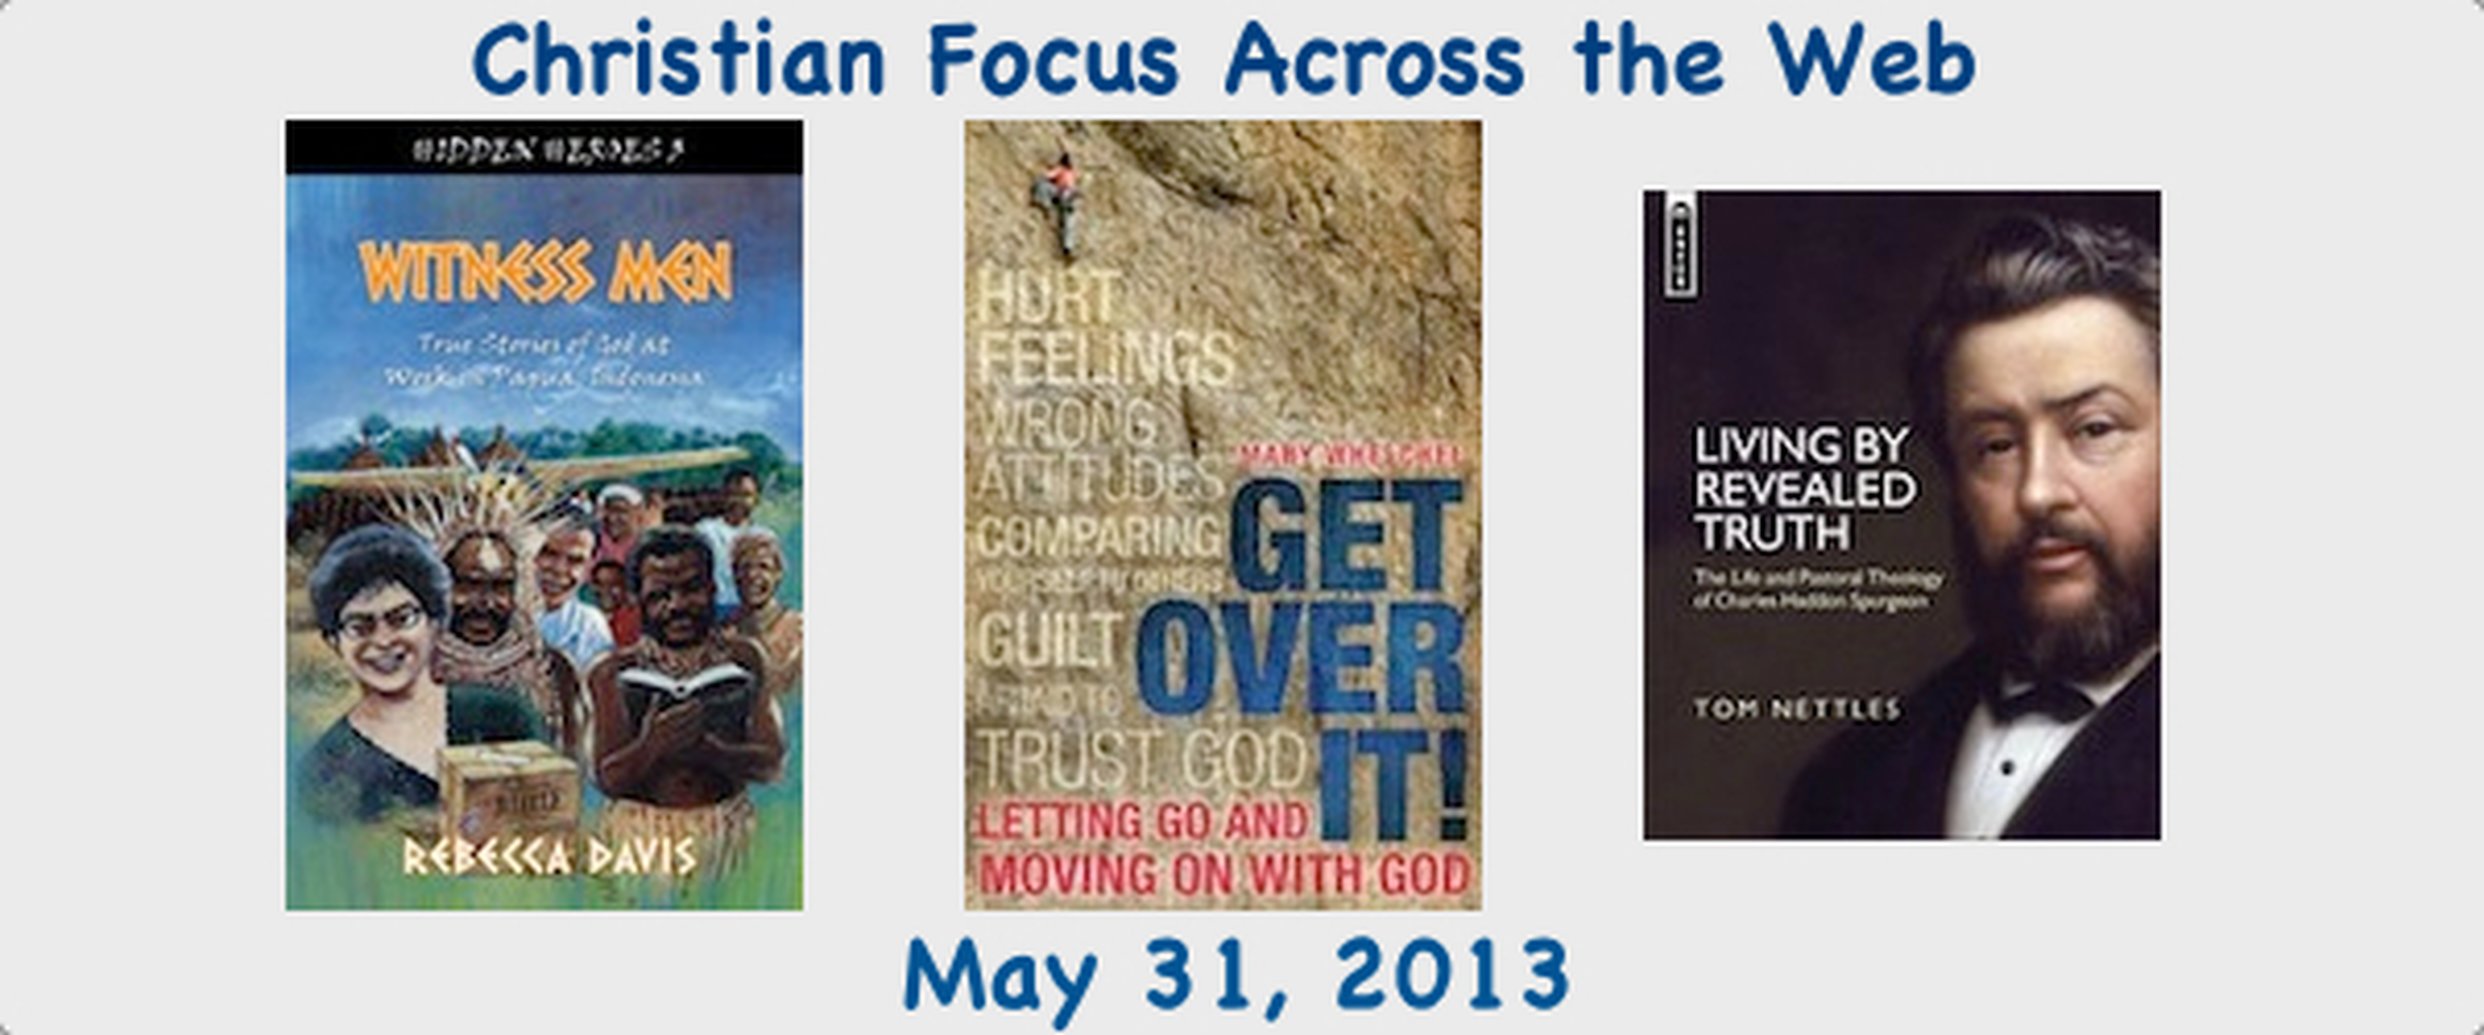 Christian Focus Across the Web - May 31, 2013